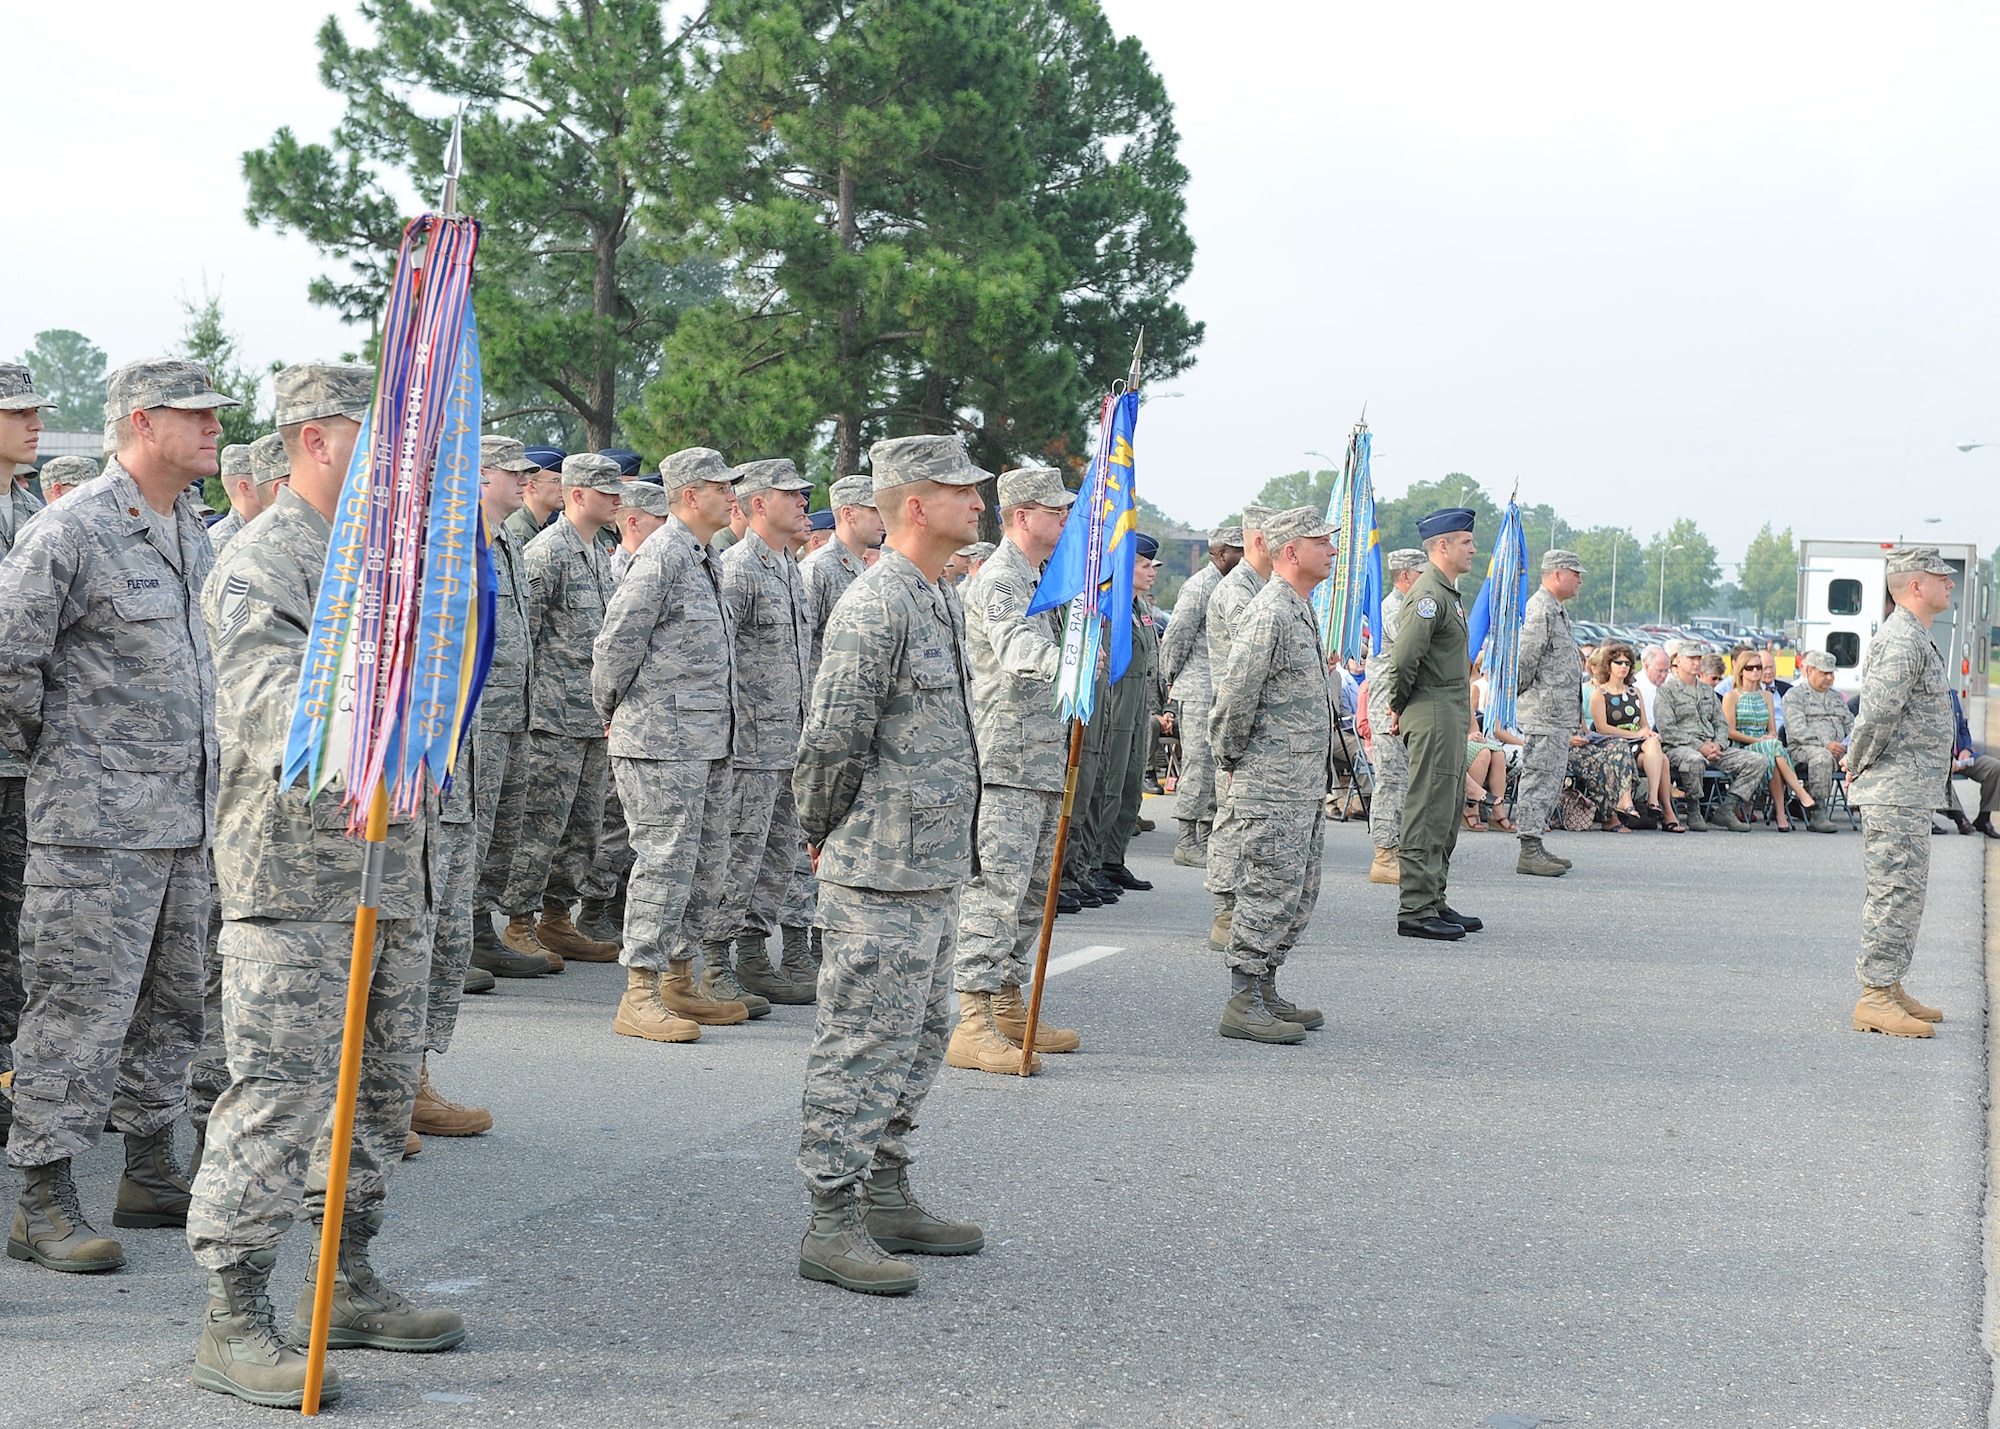 Members of the 4th Fighter Wing stand at ease during the change of command ceremony, Sept. 9, 2008.General North was the presiding official for the change of command on Seymour Johnson Air Force Base, N.C. (U.S. Air Force photo by Airman 1st Class Whitney Stanfield)